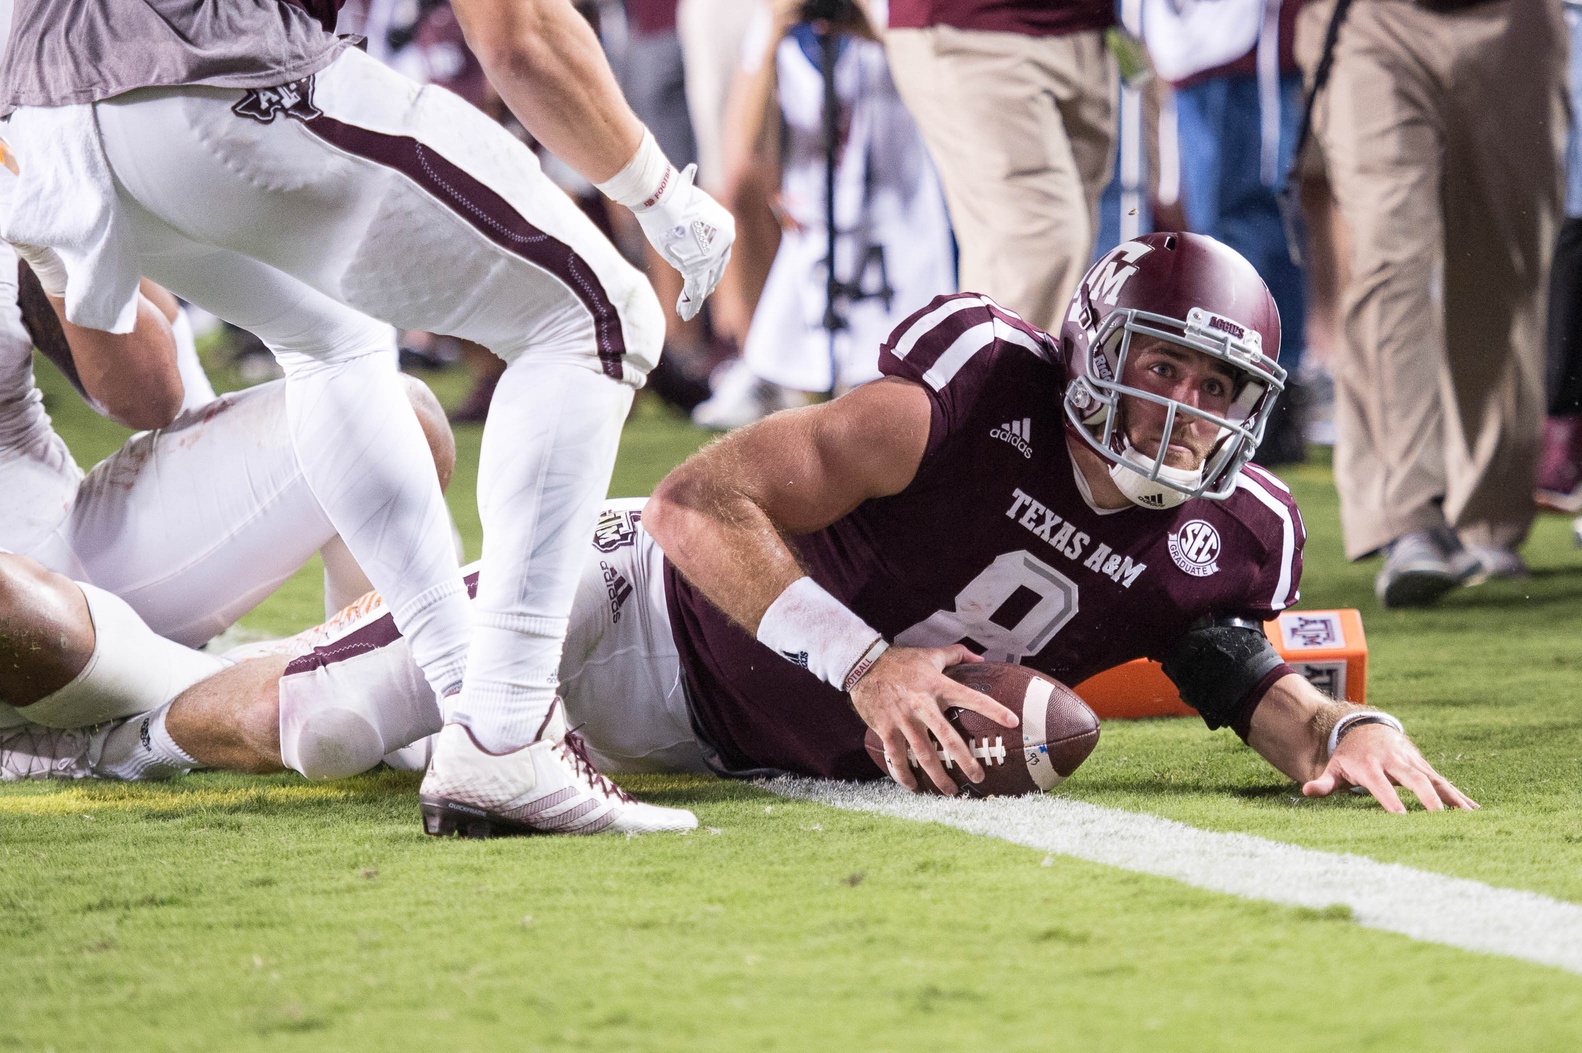 Oct 8, 2016; College Station, TX, USA; Texas A&M Aggies quarterback Trevor Knight (8) scores the winning touchdown against the Tennessee Volunteers during the game at Kyle Field. The Aggies defeat the Volunteers 45-38 in overtime. Mandatory Credit: Jerome Miron-USA TODAY Sports